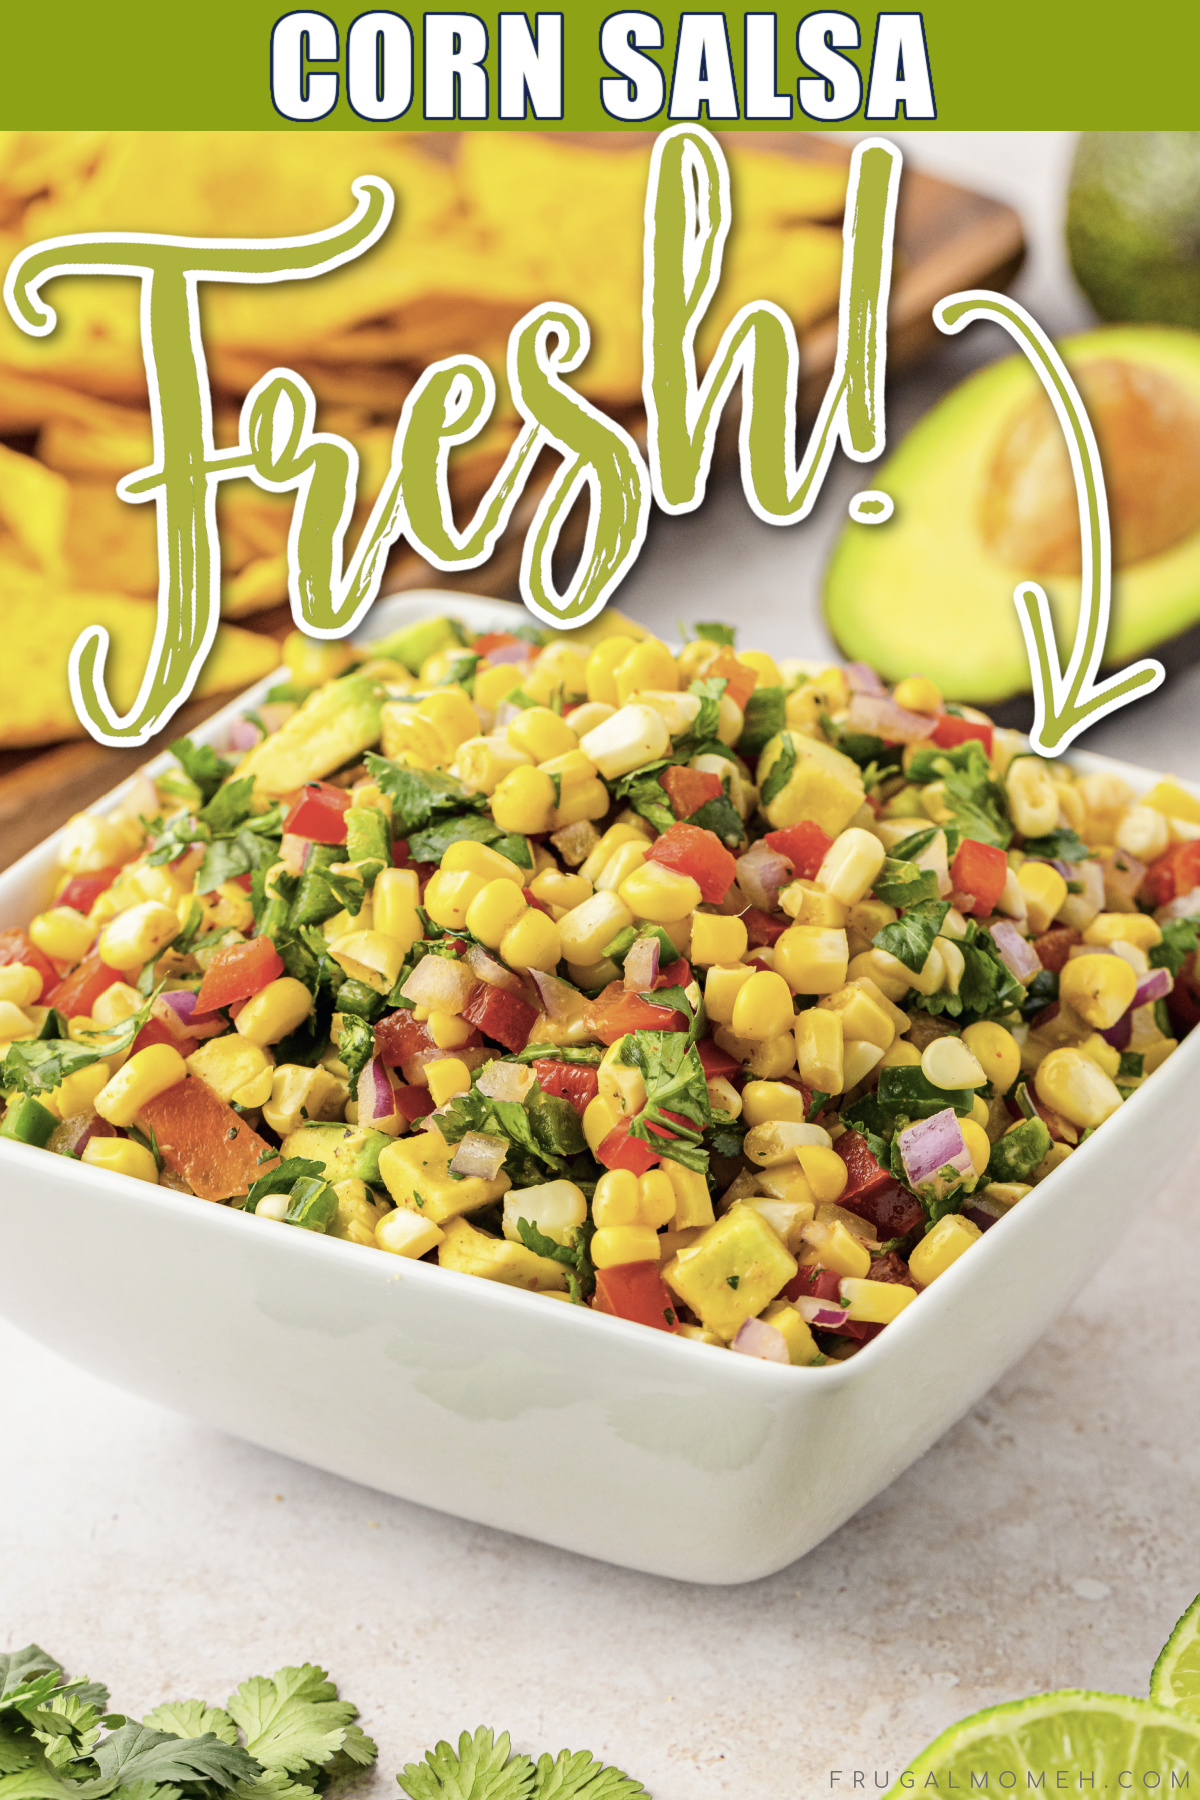 Make delicious corn salsa with this easy recipe. With just a few simple, fresh ingredients you can have an irresistible homemade salsa!